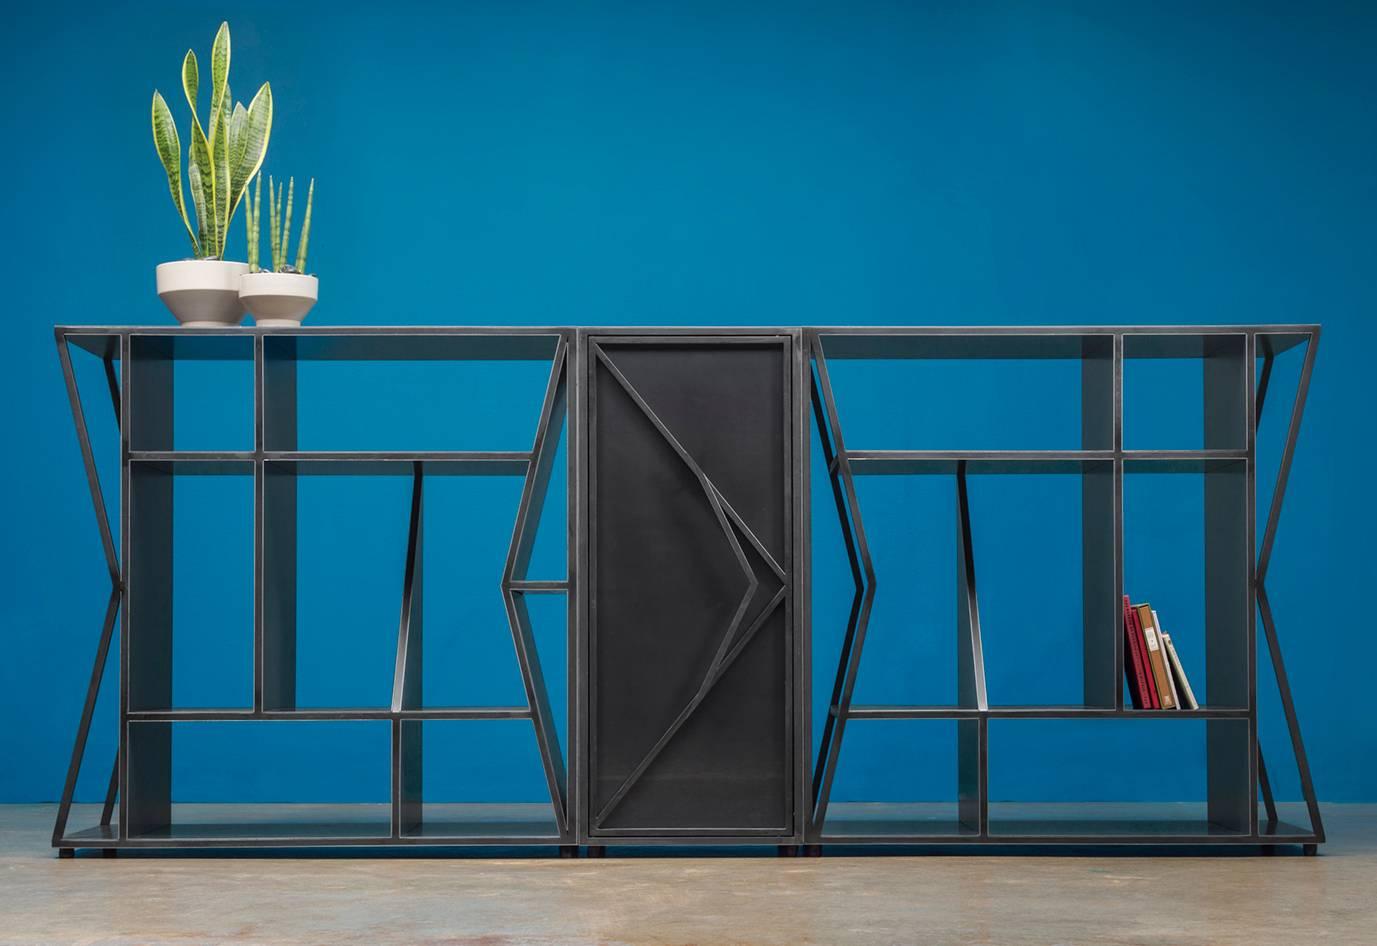 The most versatile piece of furniture in Force/Collide's portfolio, the Meridian Modular credenza is an all-steel construction consisting of double-sided panelling with no exposed fasteners. It provides total flexibility; the credenza breaks apart